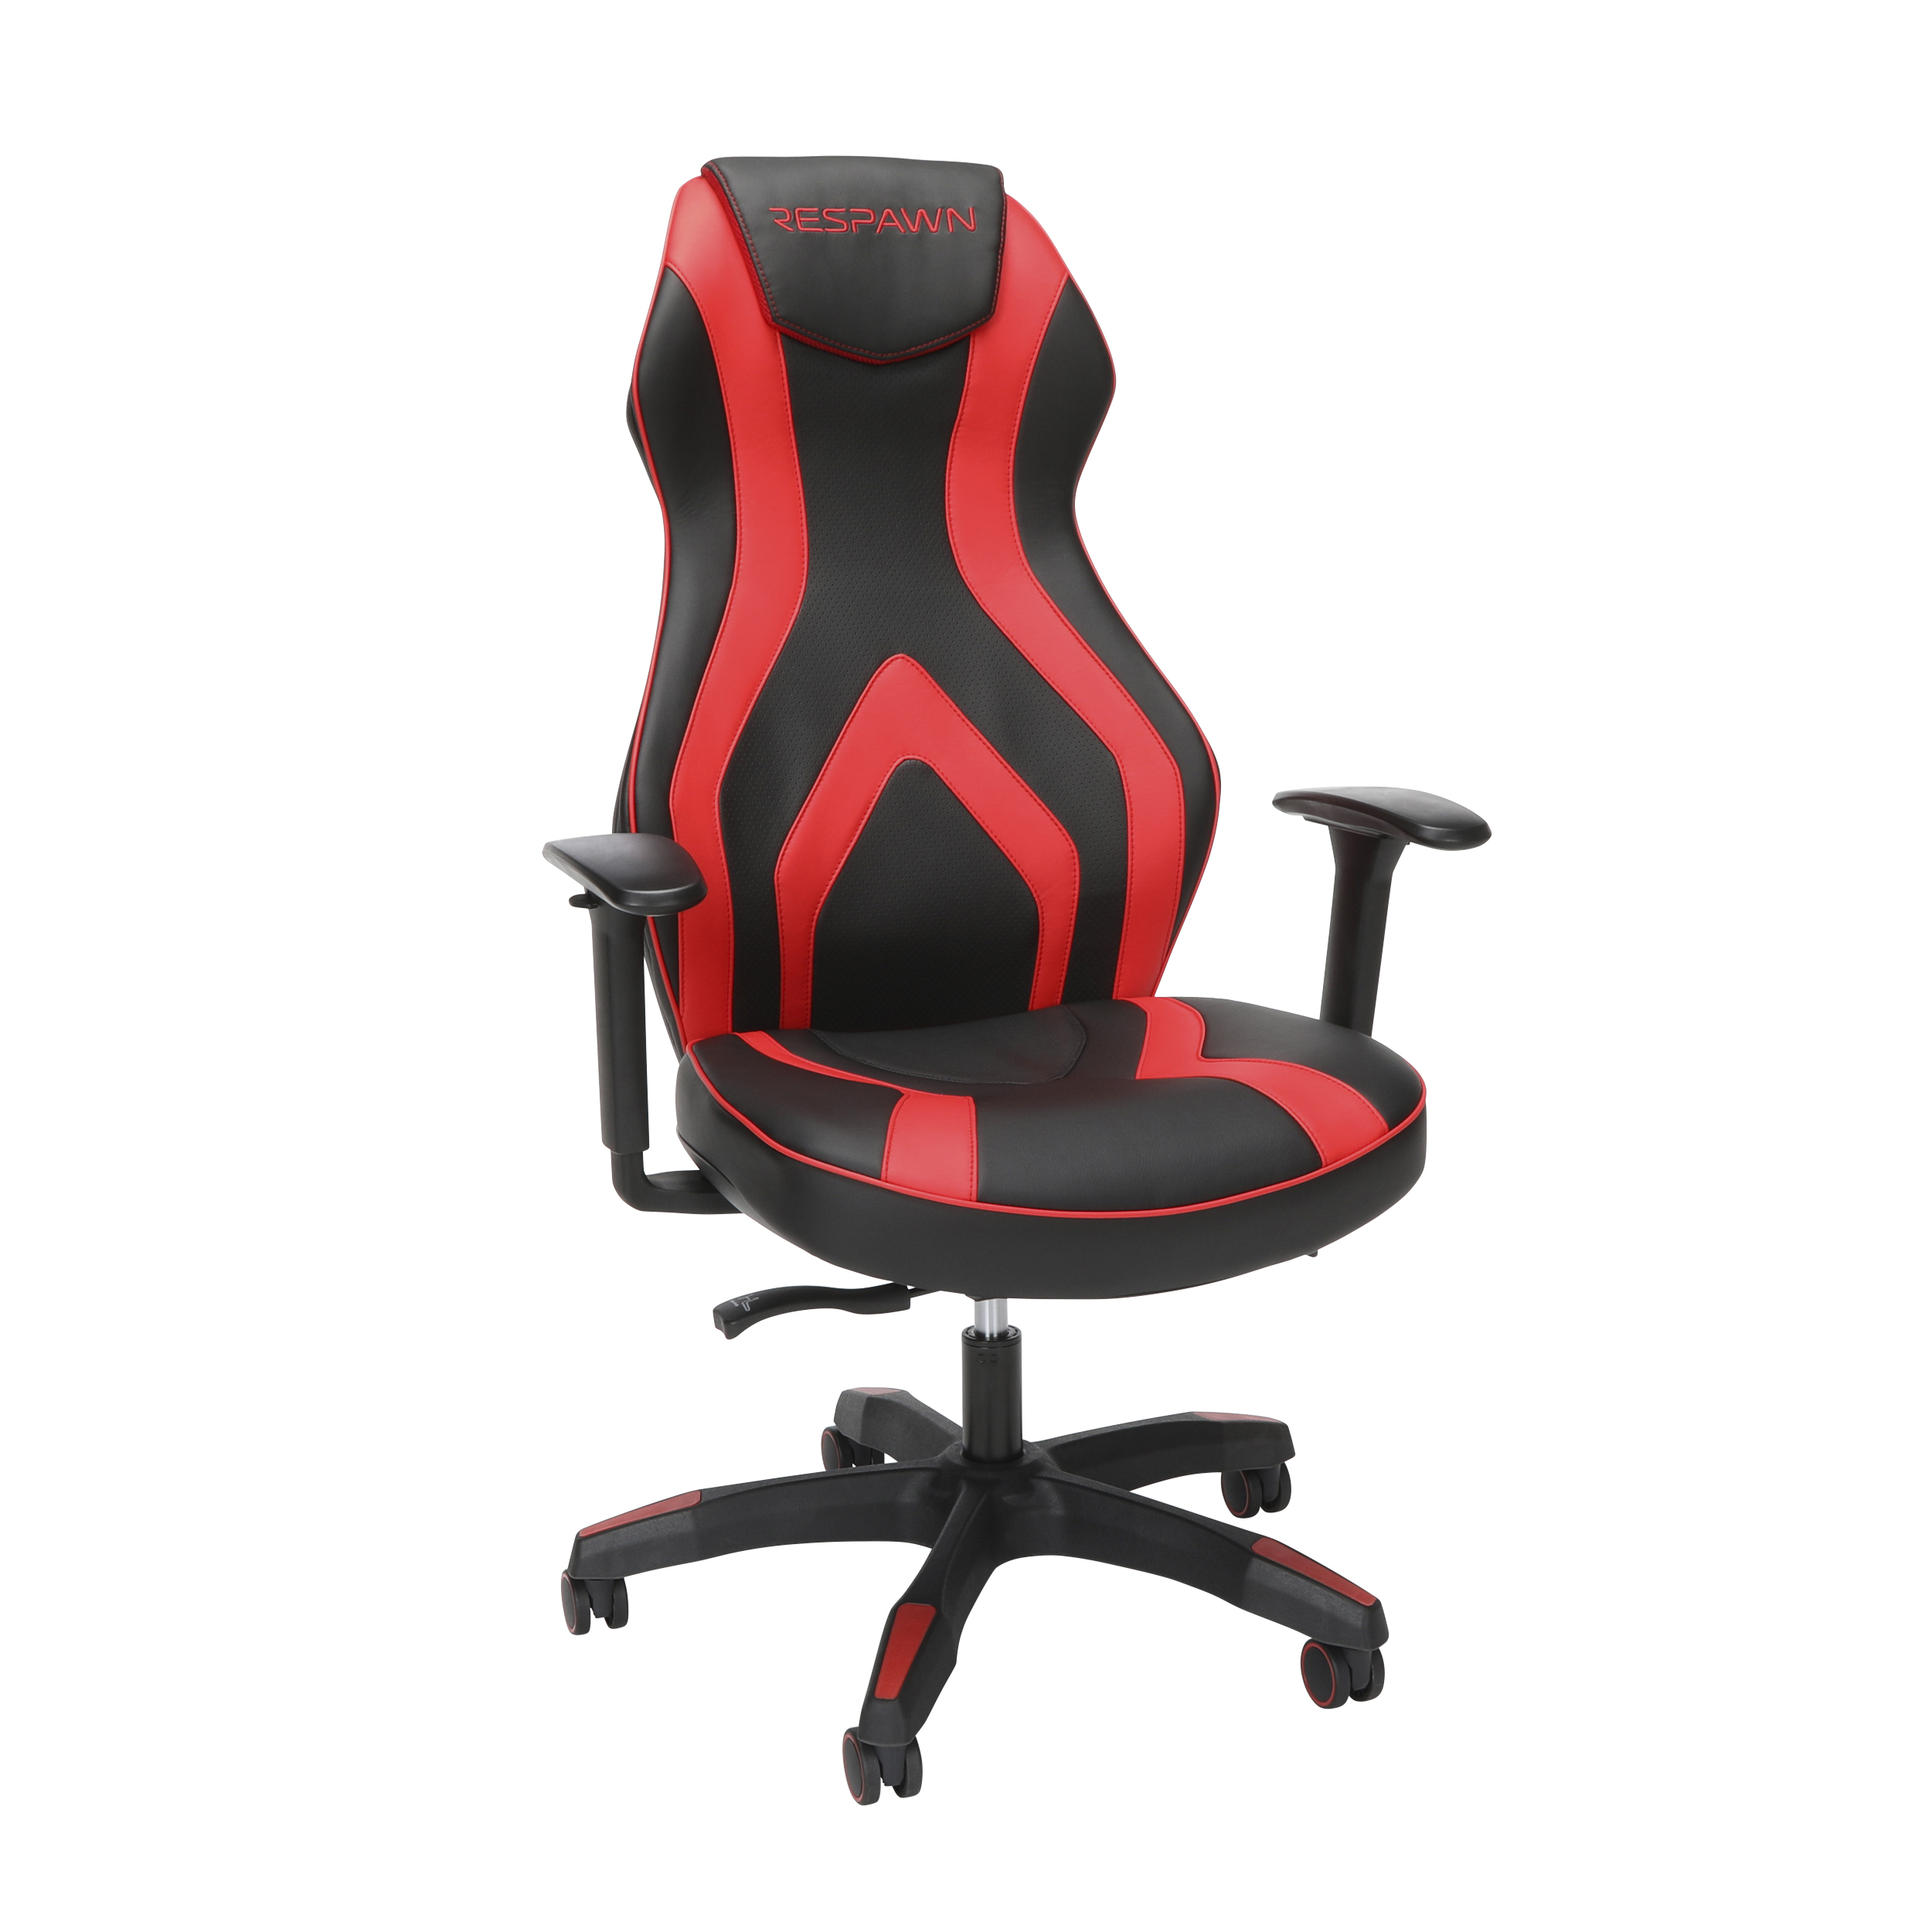 RESPAWN Sidewinder Gaming Chair, PU Leather, in Rage Red (RSP-125-RED) - image 1 of 17